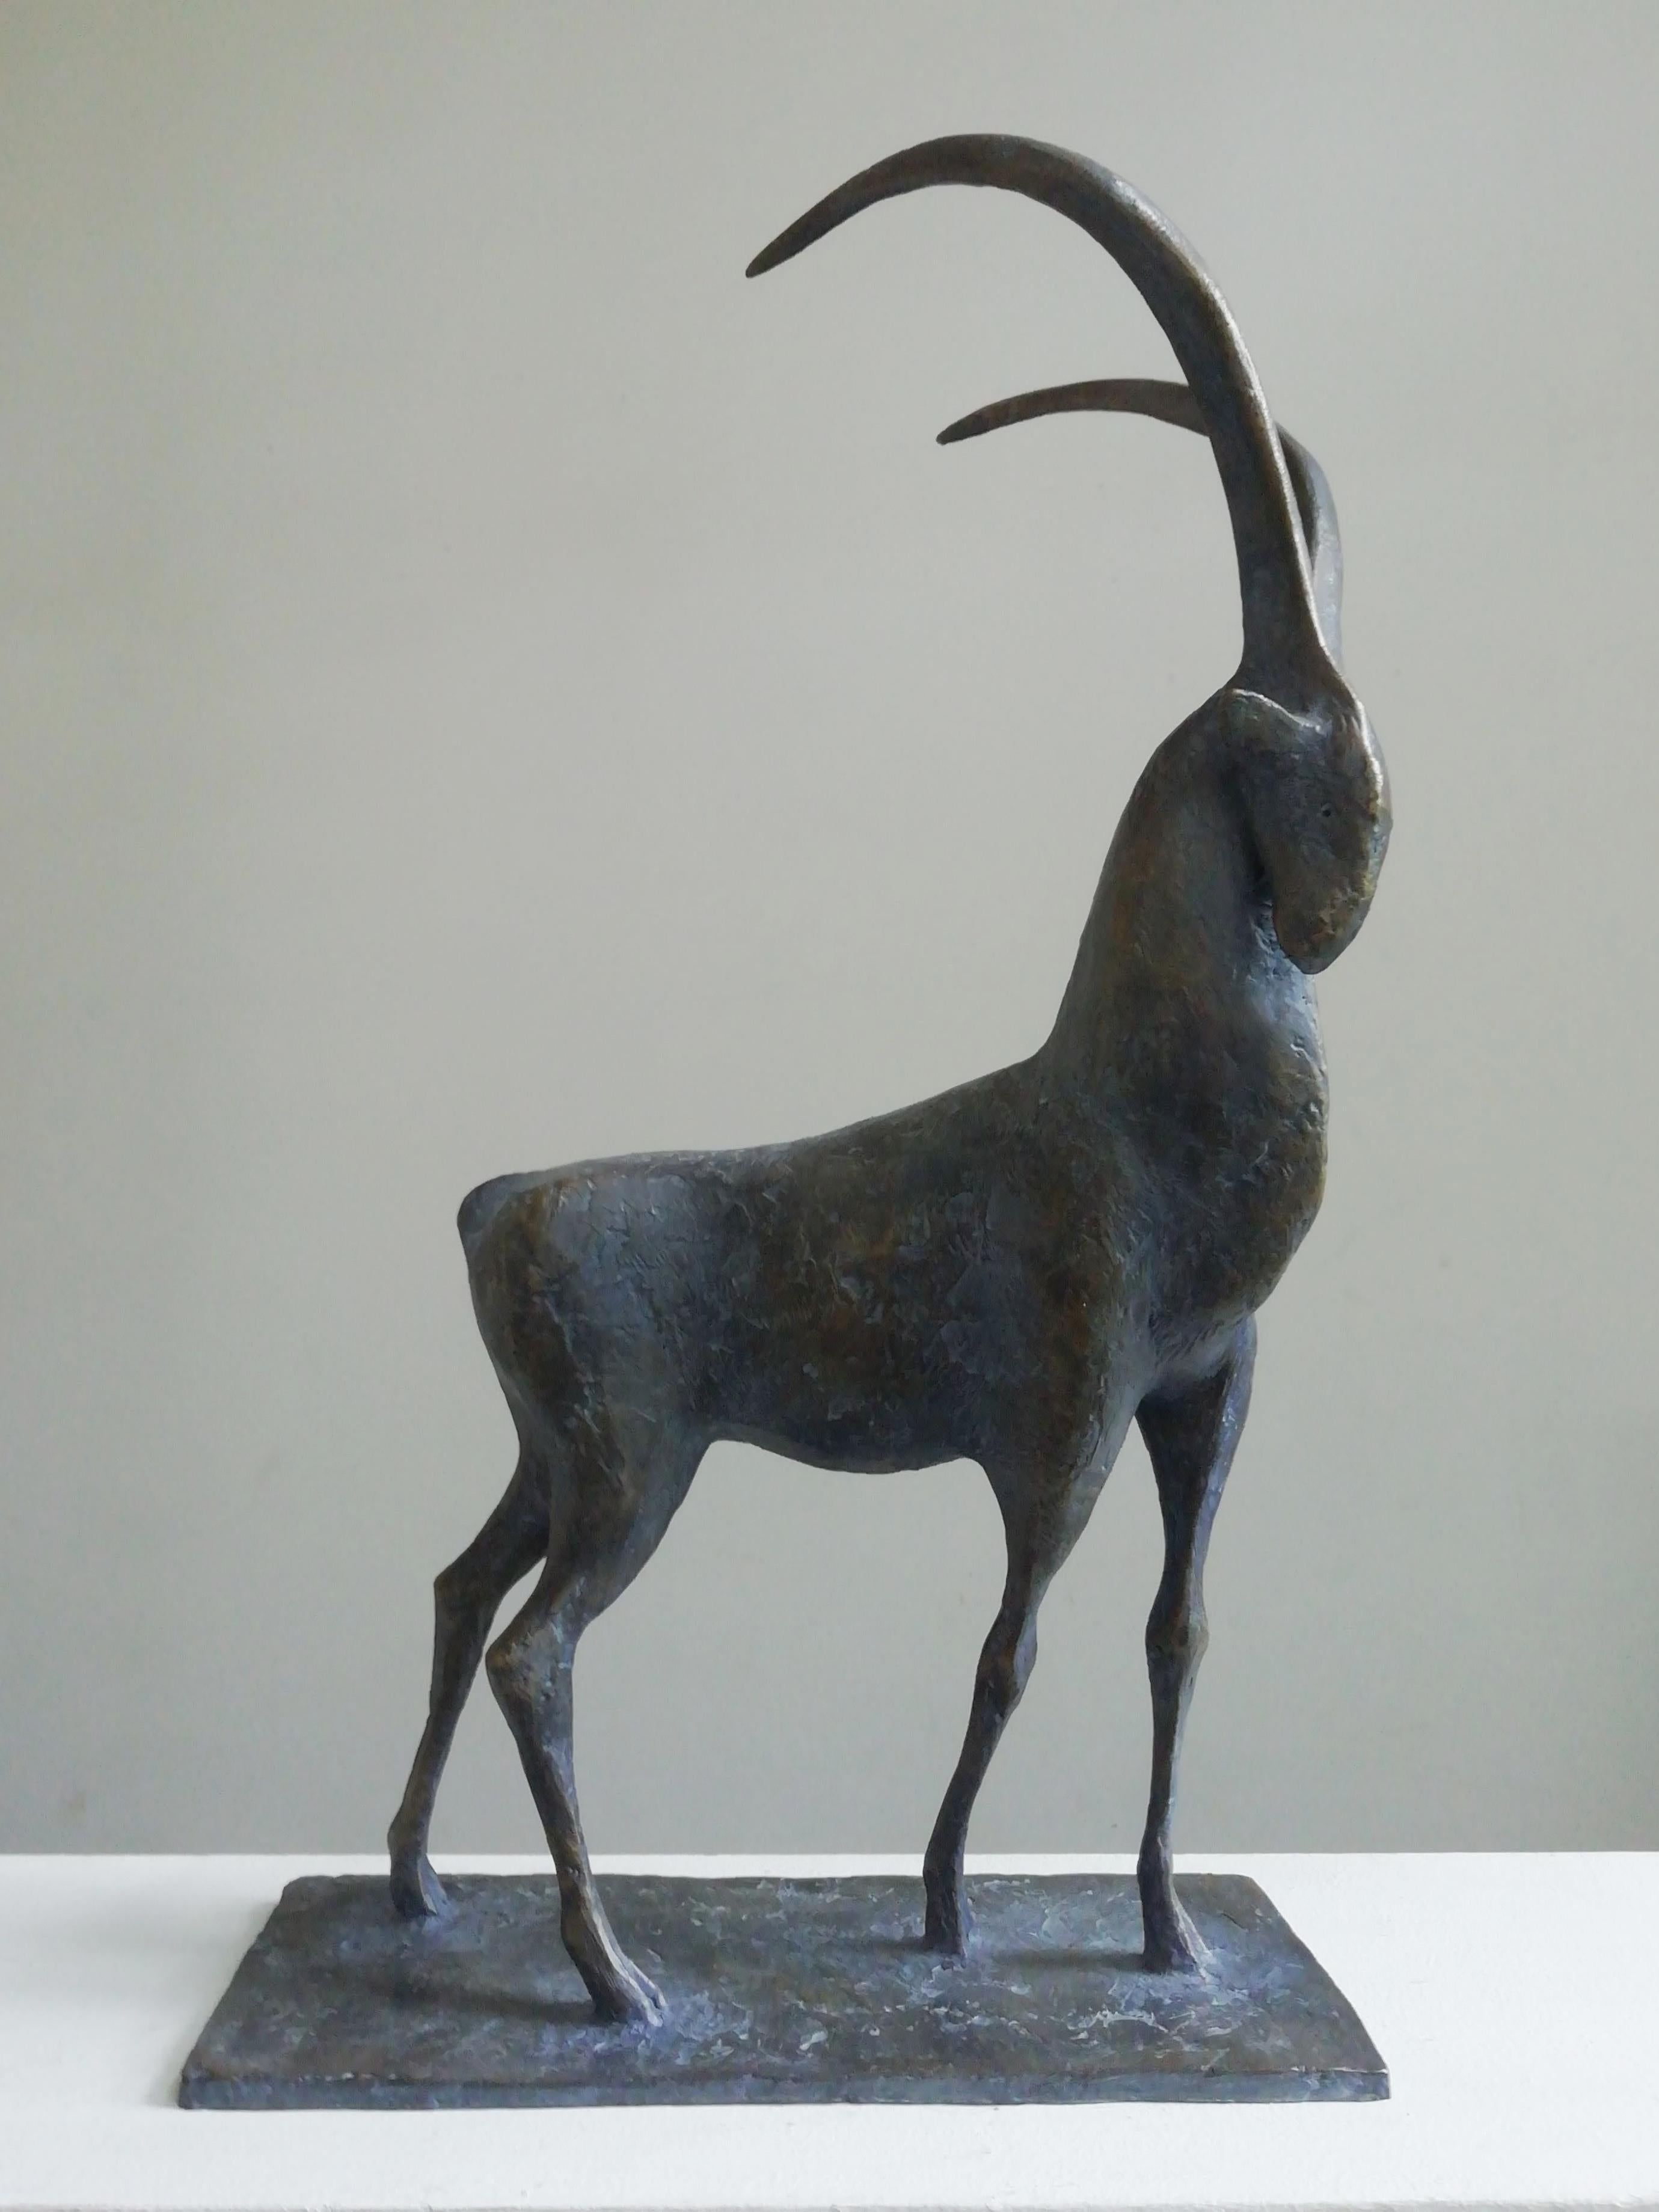 Ibex is a bronze sculpture by French contemporary artist Pierre Yermia, dimensions are 62 × 37 × 16 cm (24.4 × 14.6 × 6.3 in). 
The sculpture is signed and numbered, it is part of a limited edition of 8 editions + 4 artist’s proofs, and comes with a